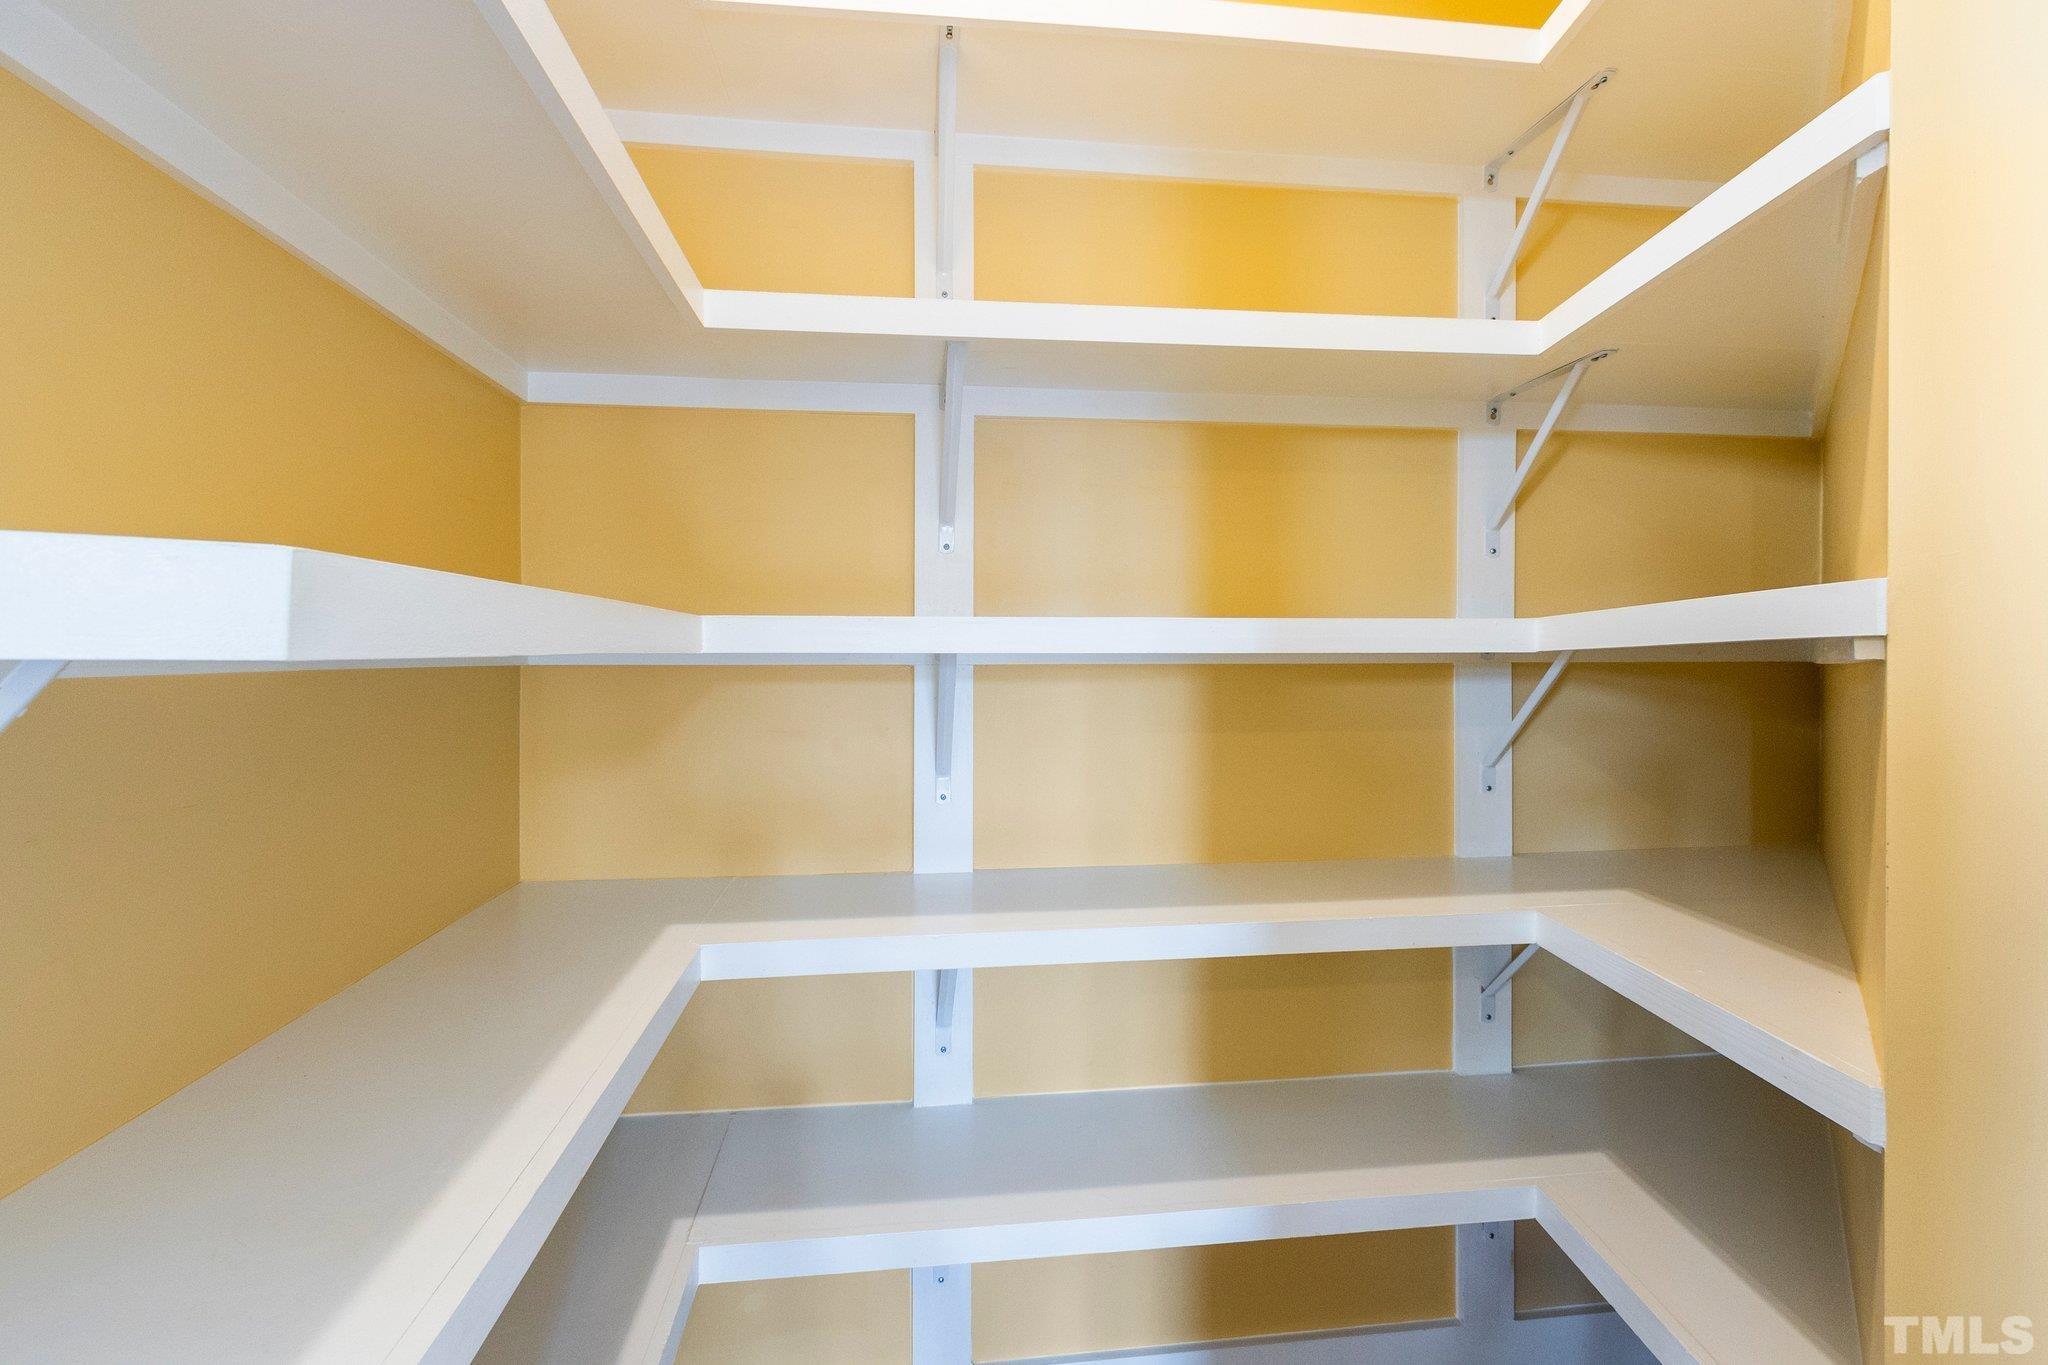 Large pantry in kitchen w built-in shelving